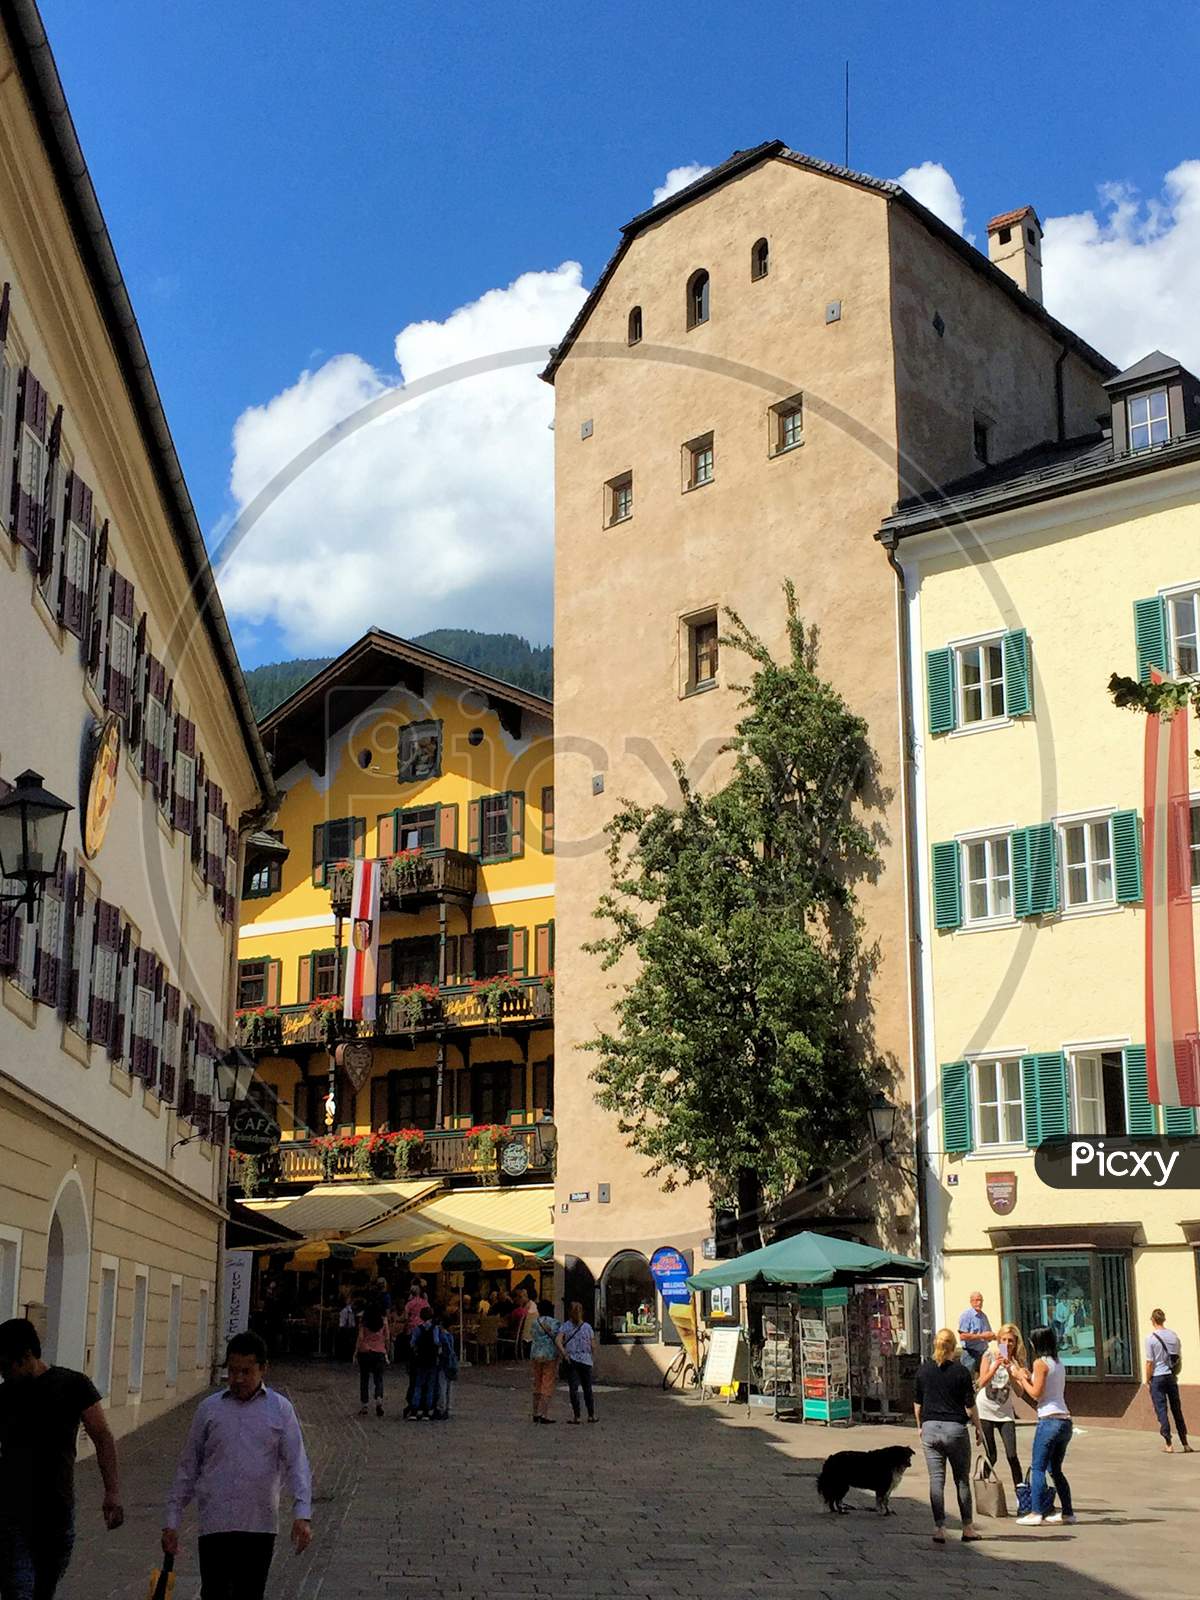 Discovering The City Of Zell Am See In Austria 16.8.2016